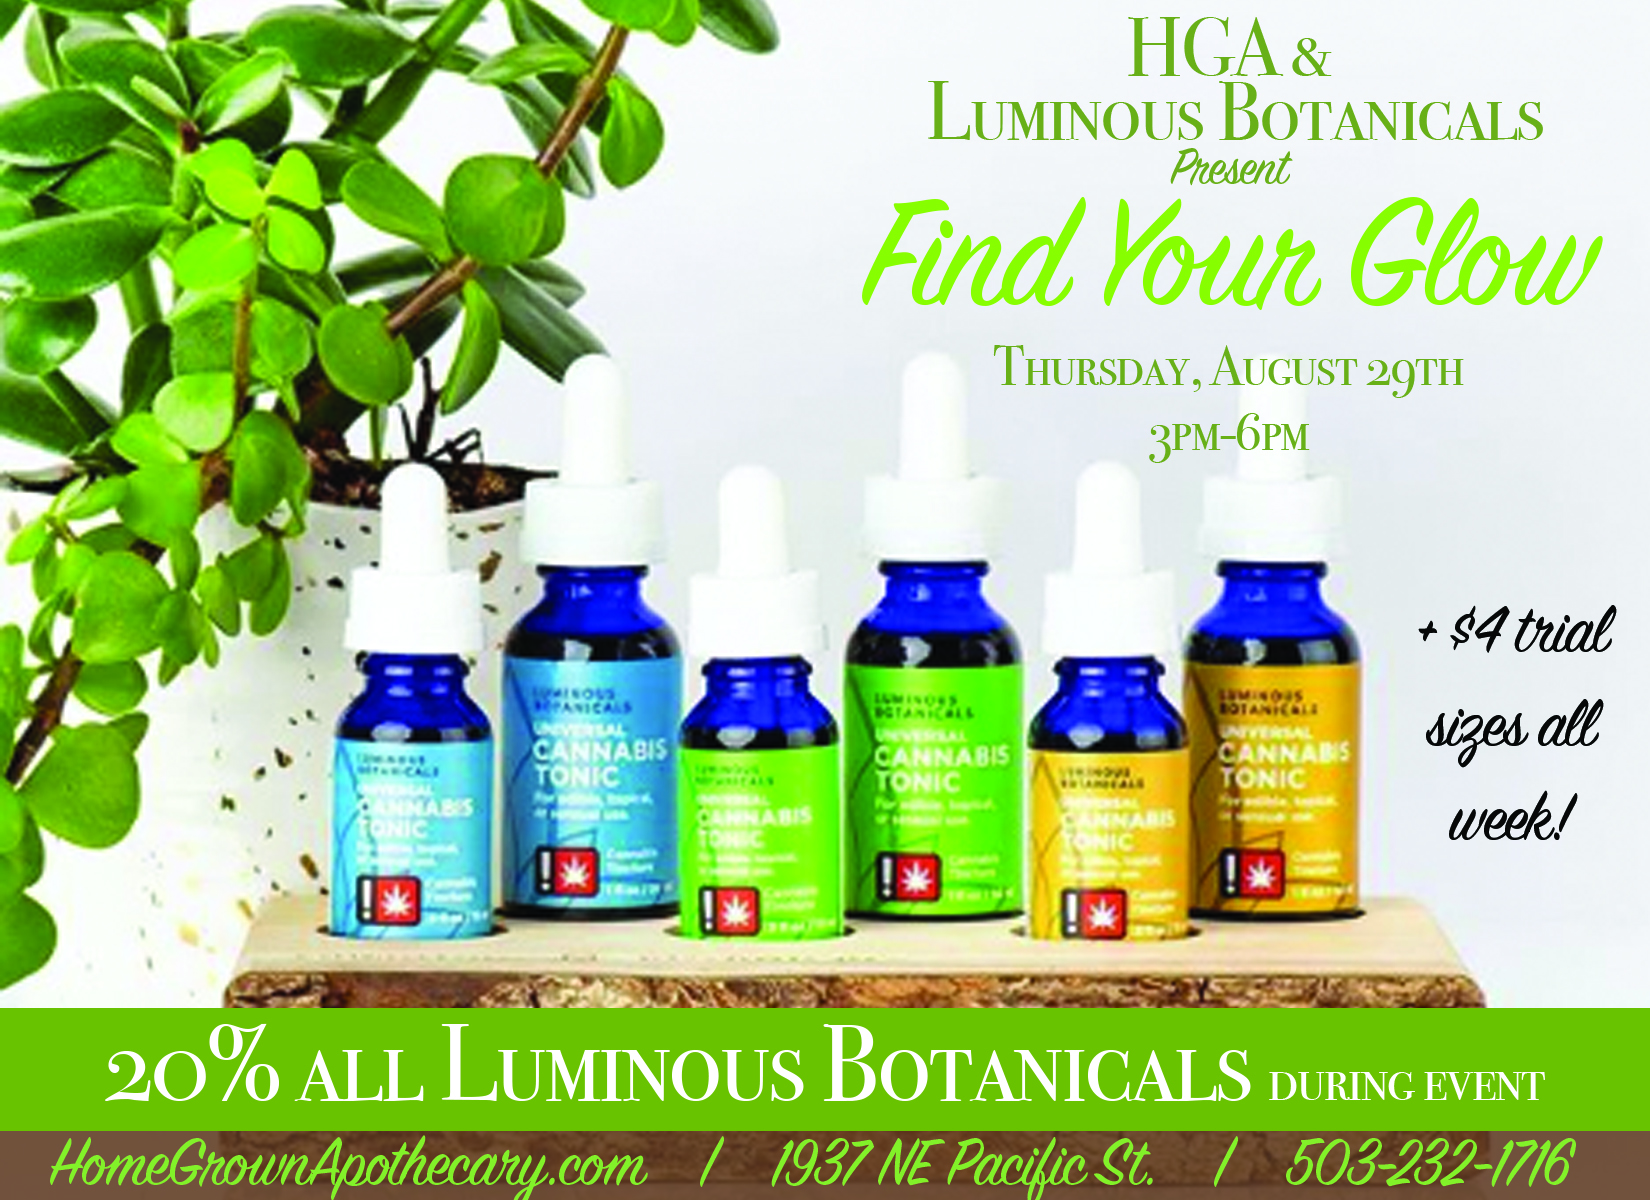 LuminousBotanicalsEventAugust2019 at Home Grown Apothecary- 20% off all Luminous Tinctures and Lubes during event.